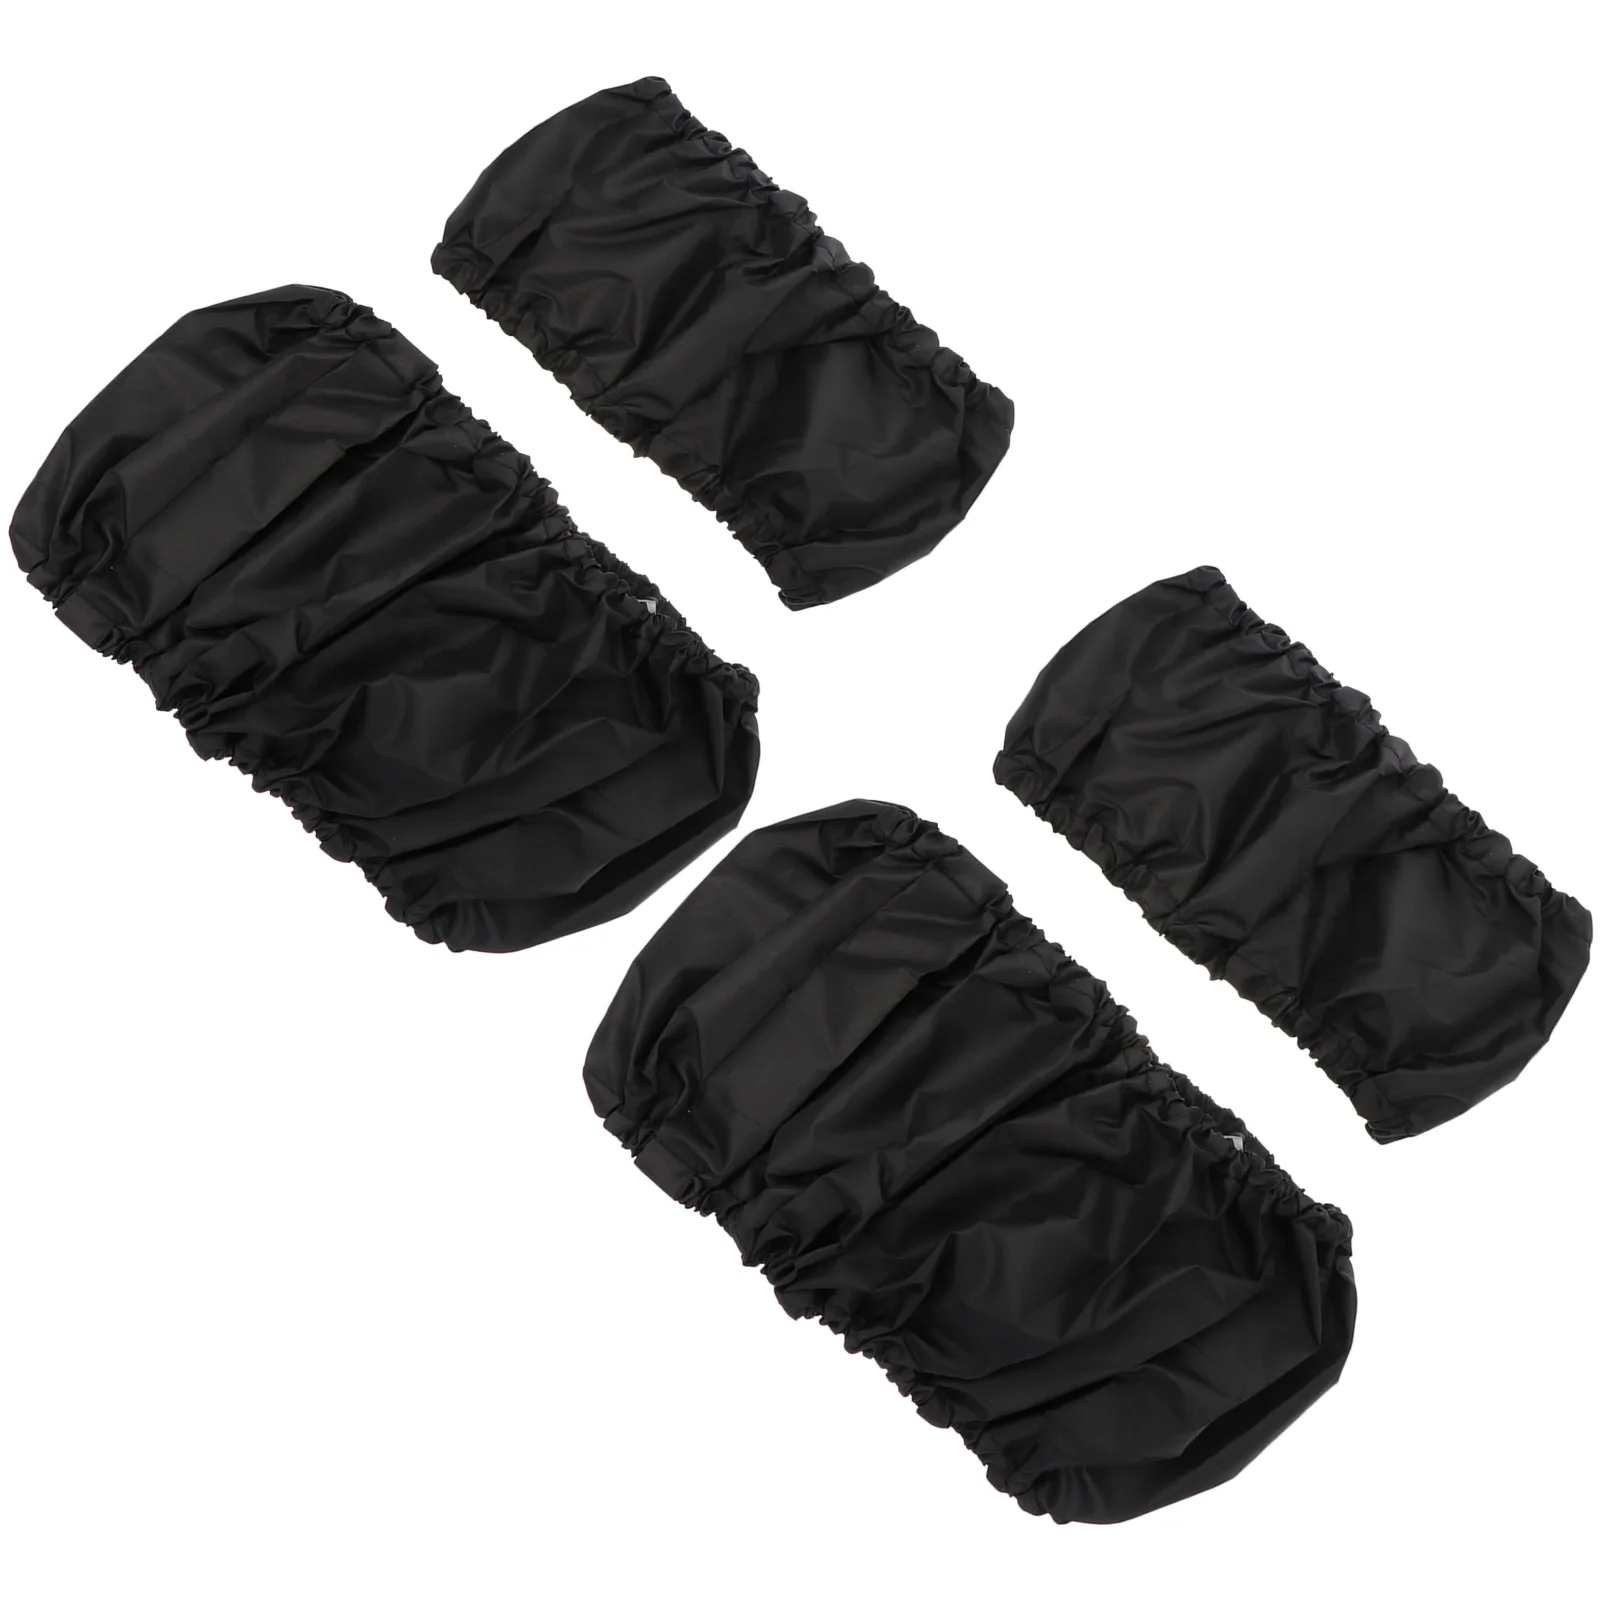 

4 PCS Wheel Cover Trailer Wheels Tire Accessory Wheelchair Protector Accessories Oxford Cloth Protective Travel Stroller four